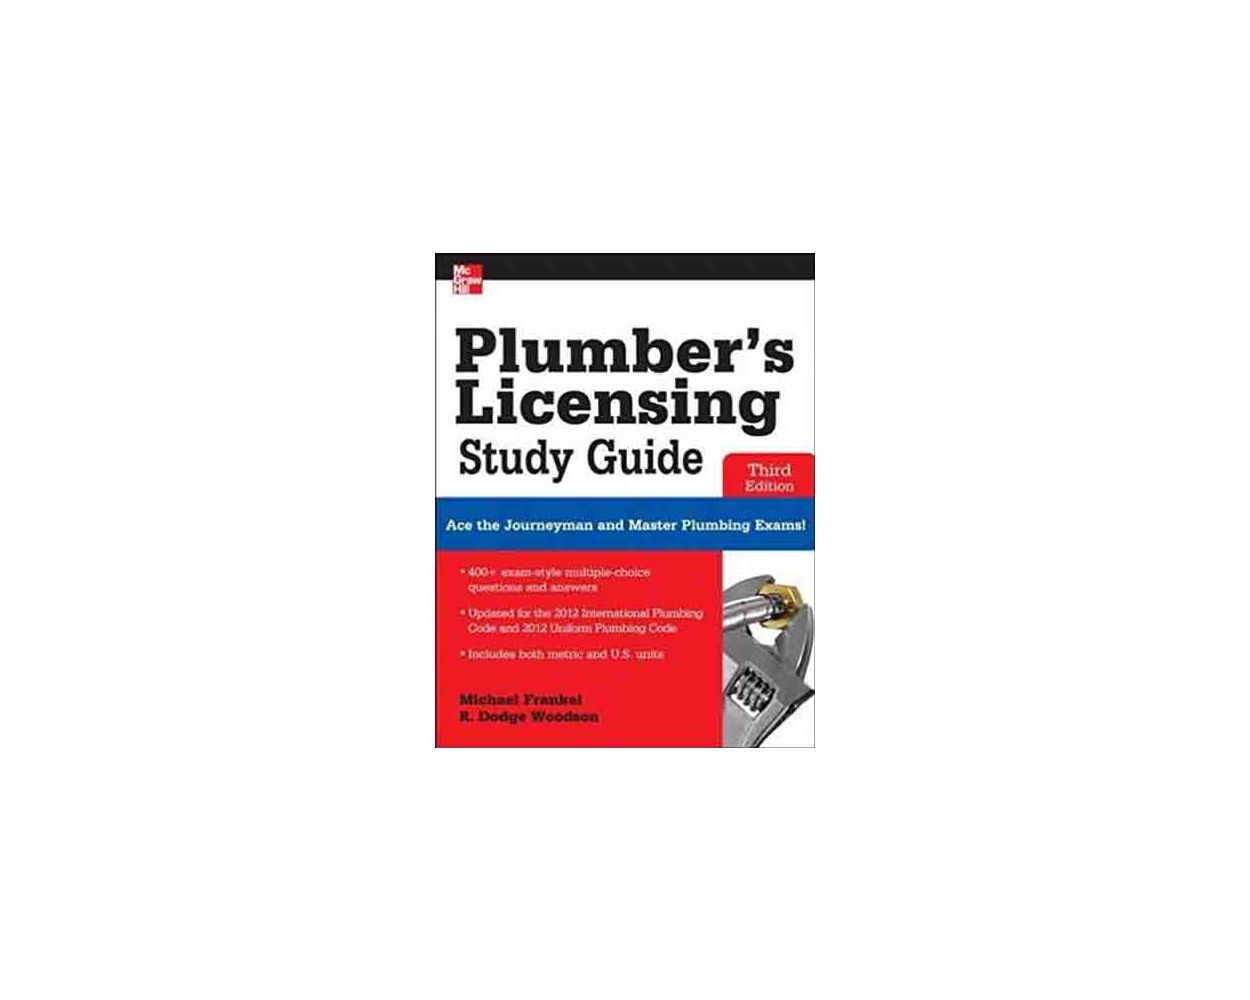 Ohio plumber installer license prep class download the last version for mac